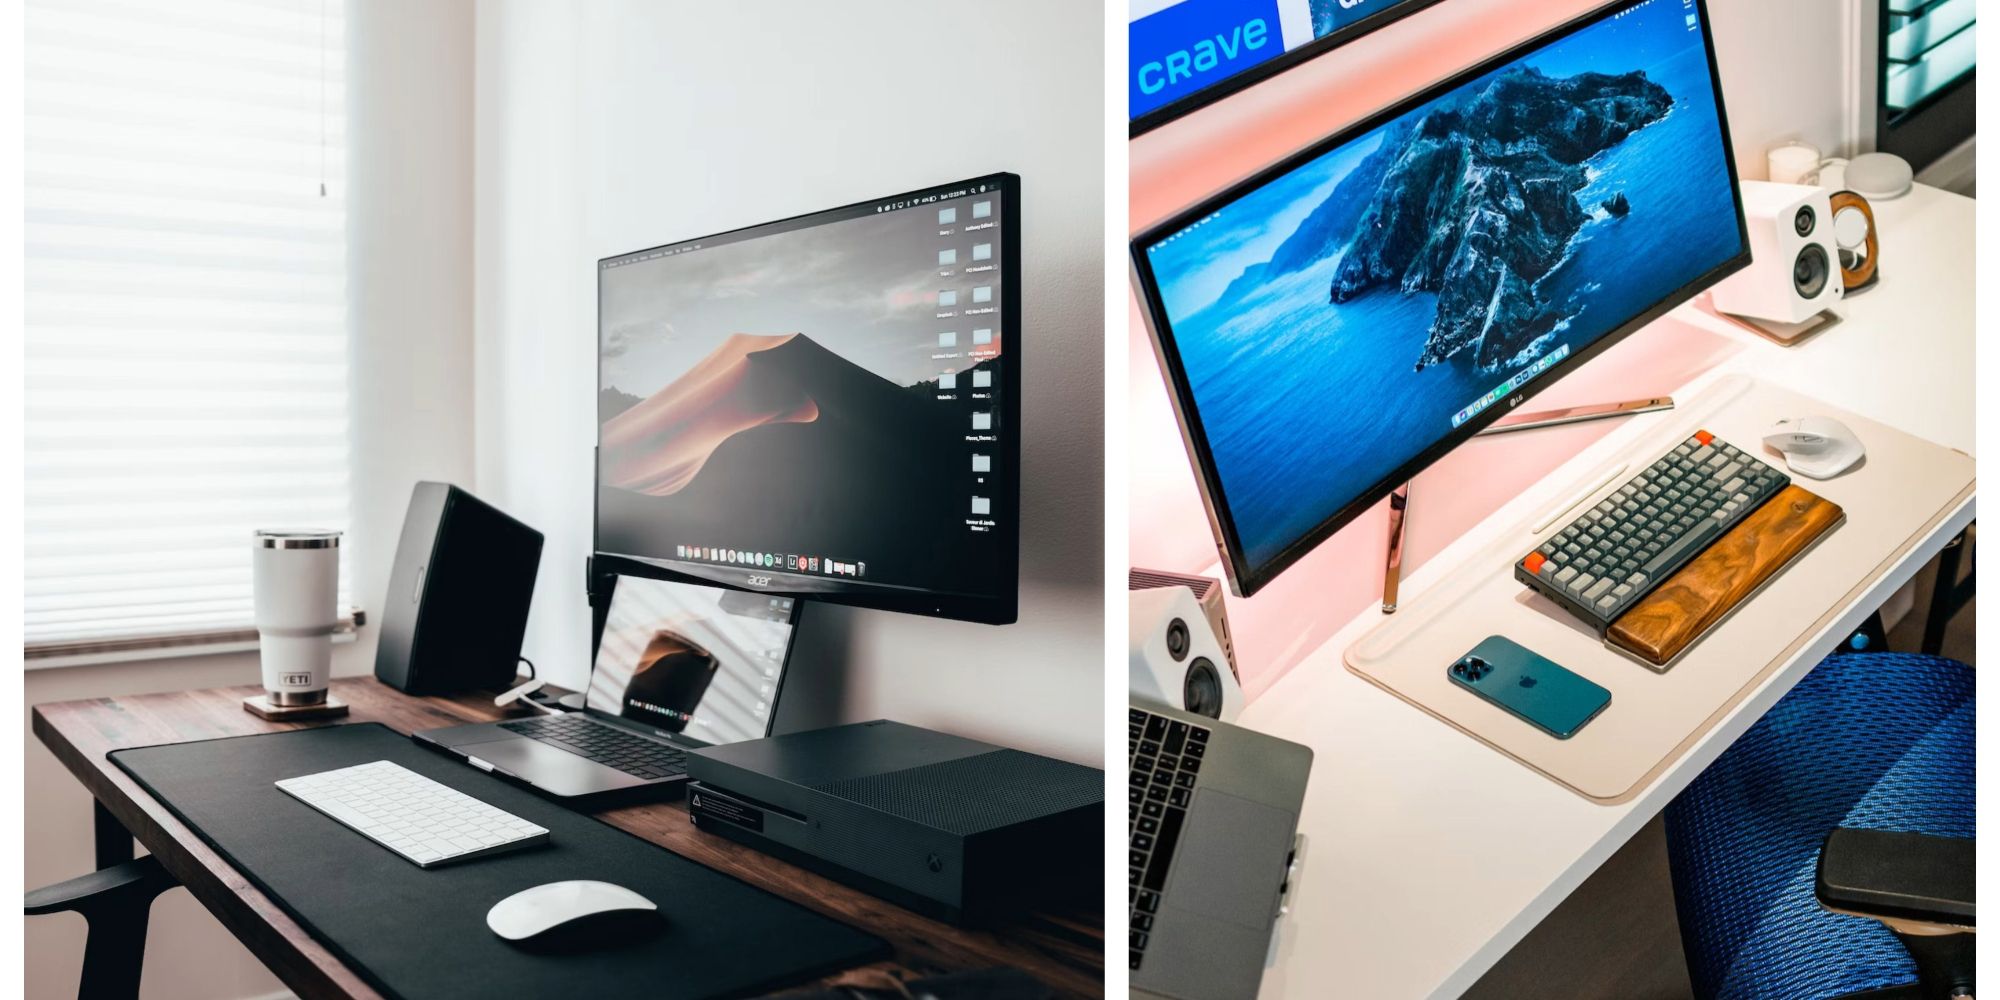 Two single-monitor setups compared side by side. On the left, a monotone tall monitor with a small display beneath it. On the right, a pastel display with a mechanical keyboard.